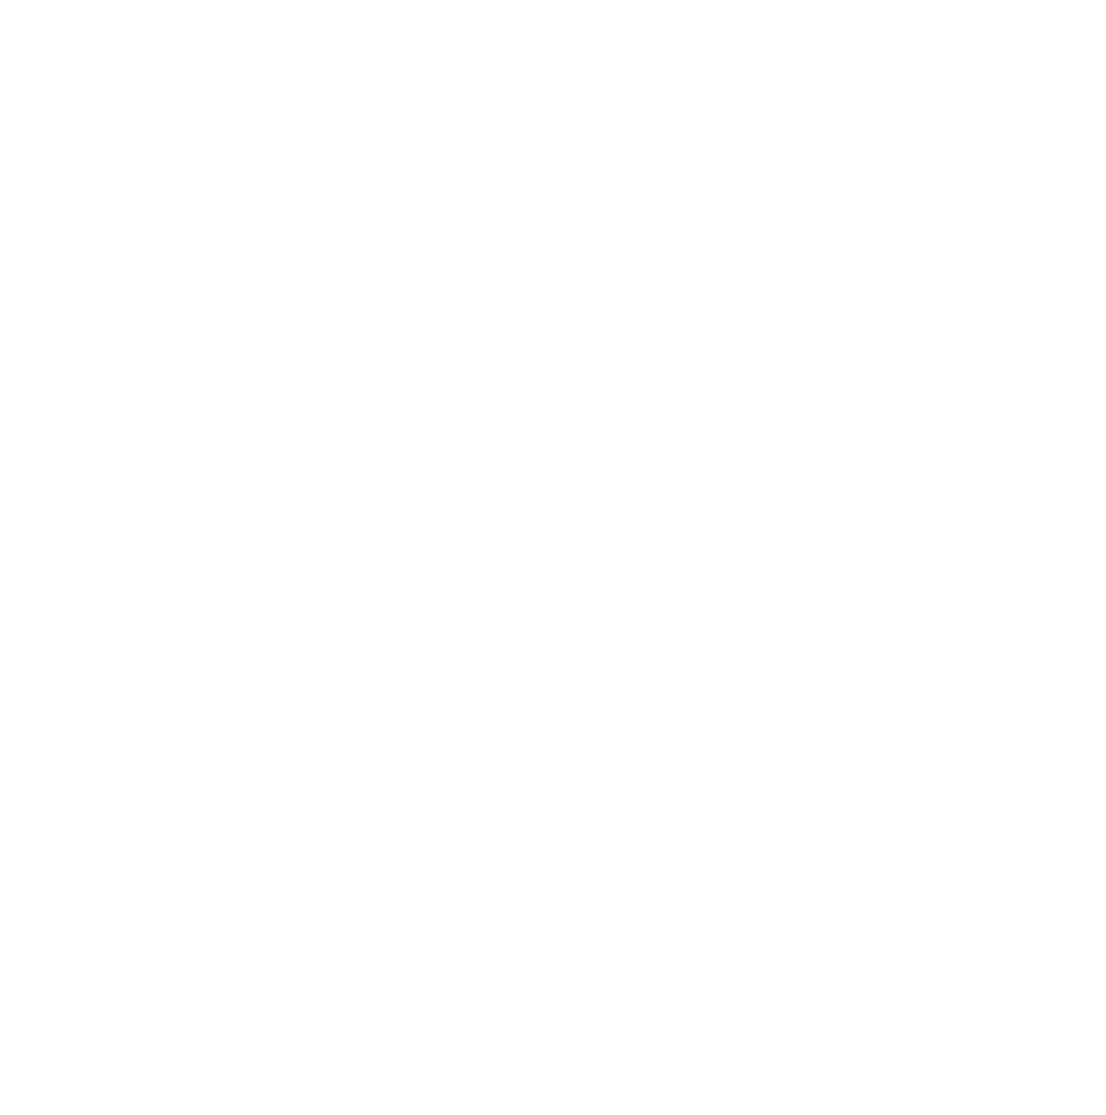 Snow PNG Image